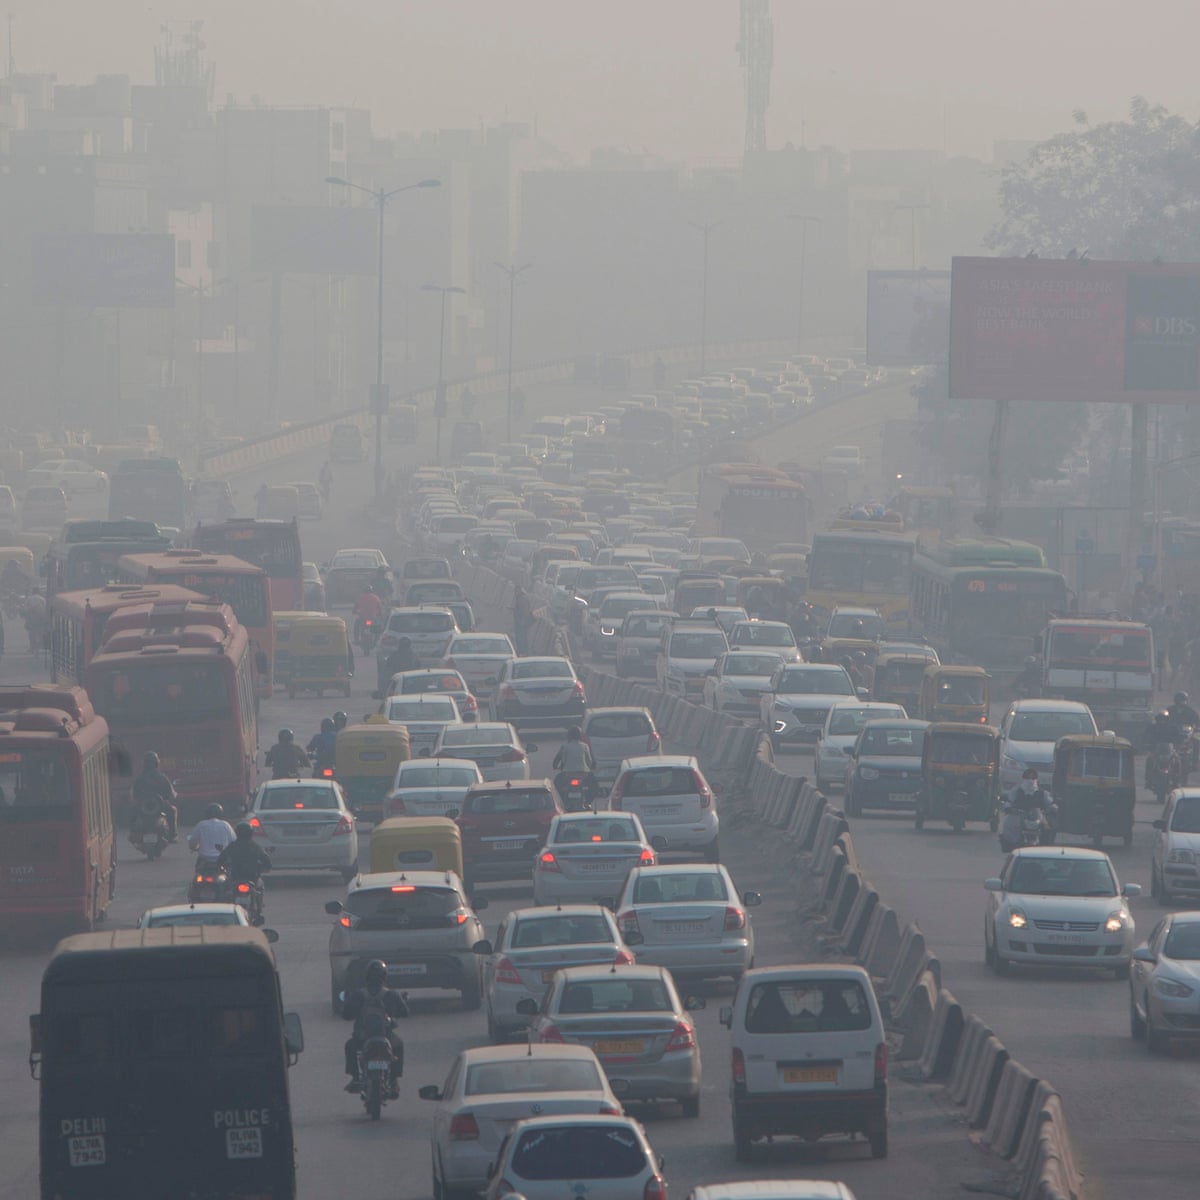 Most Polluted Cities in the World